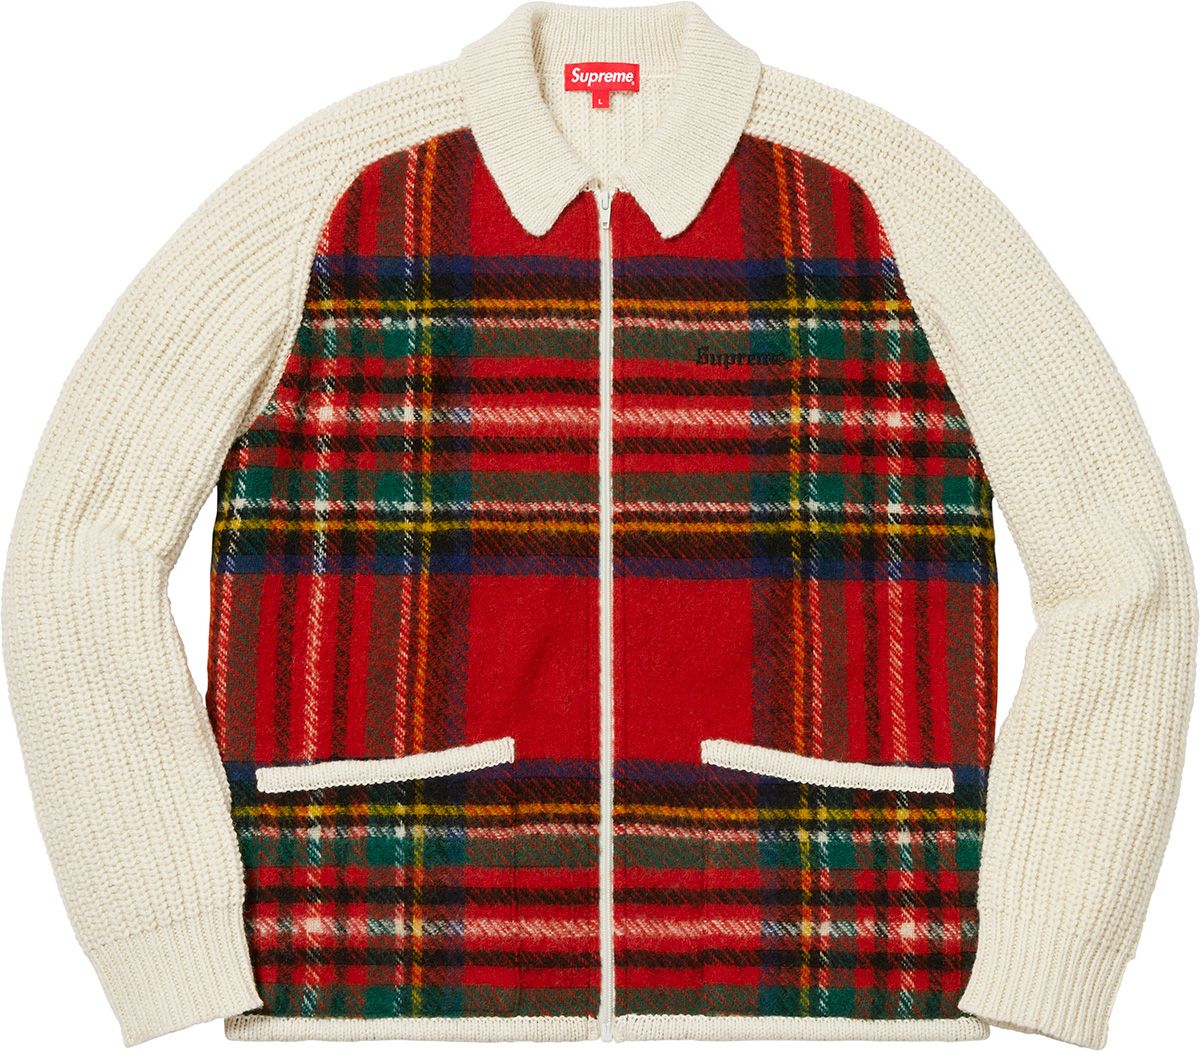 Big Letters Sweater - Fall/Winter 2018 Preview – Supreme